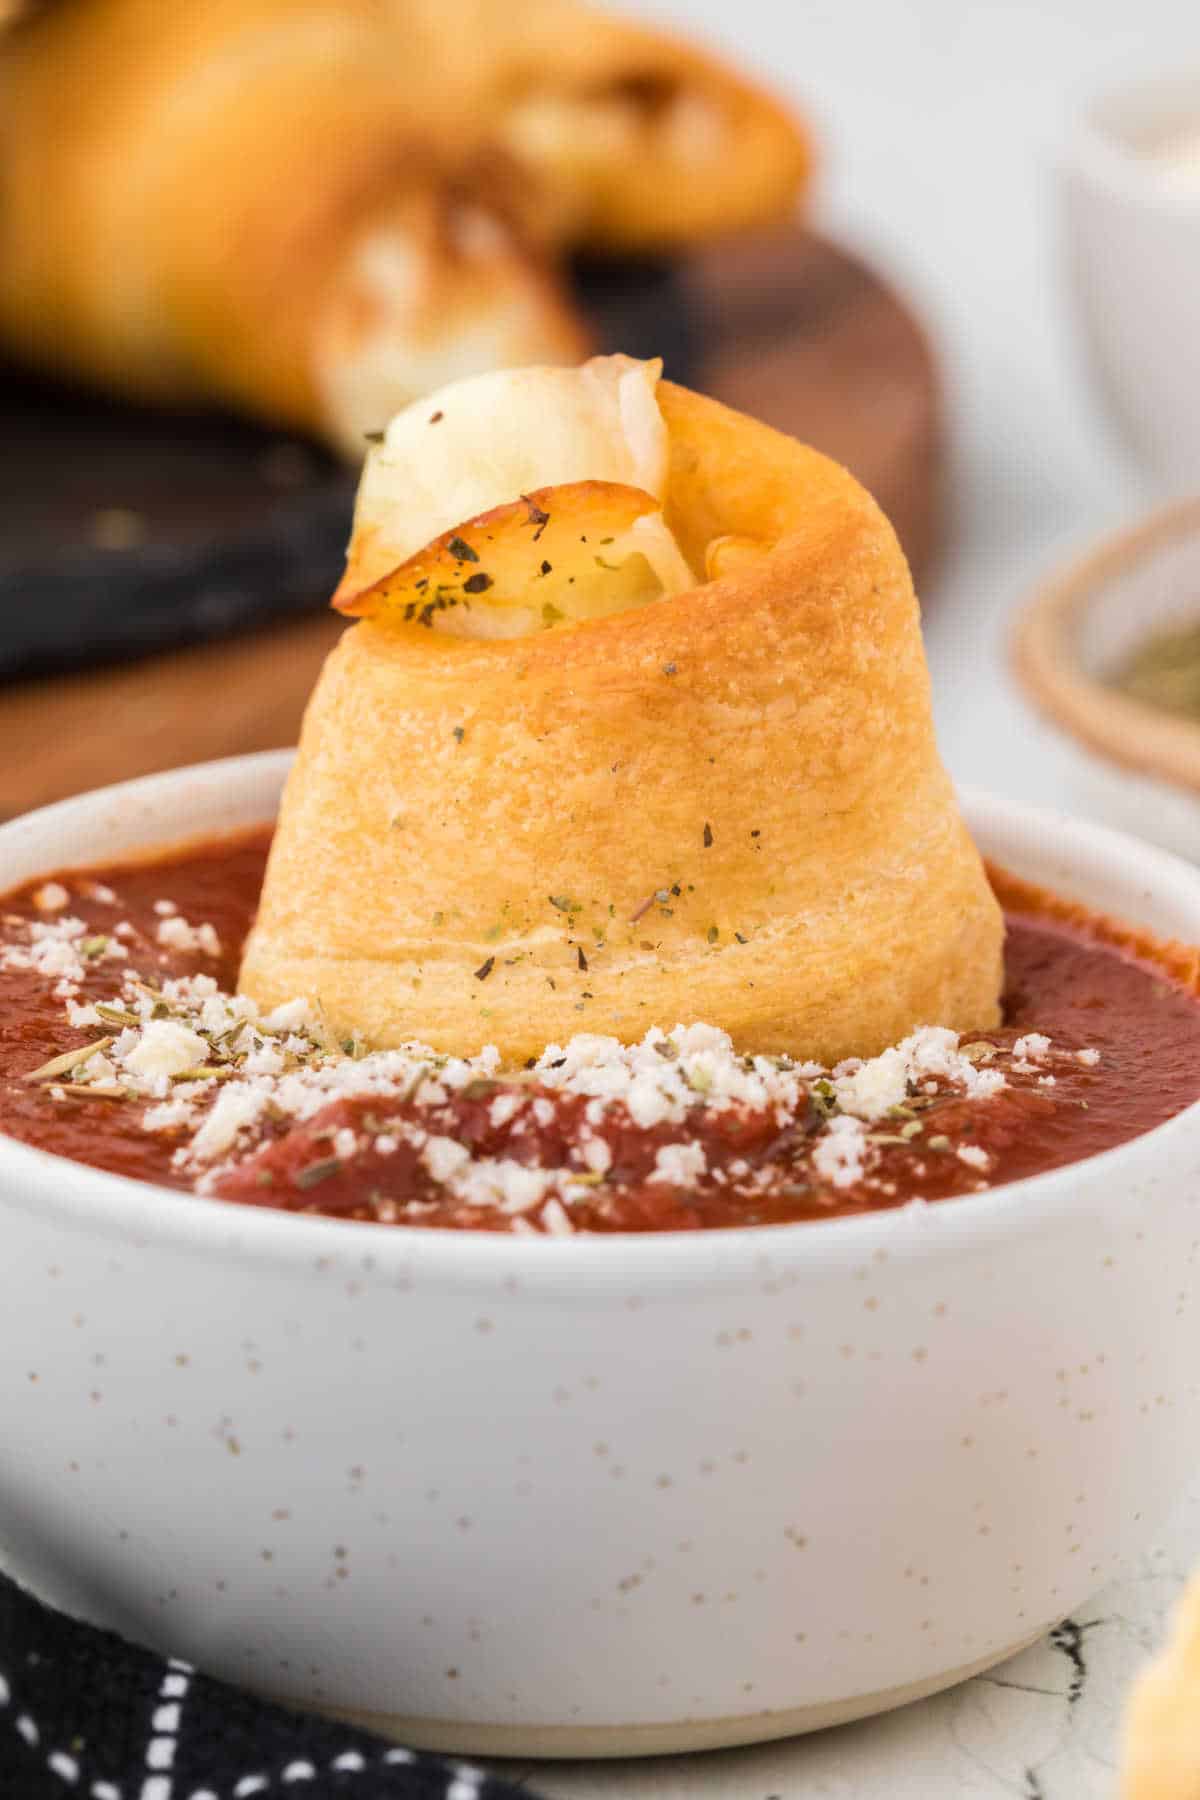 A pizza roll dunked in pizza sauce.